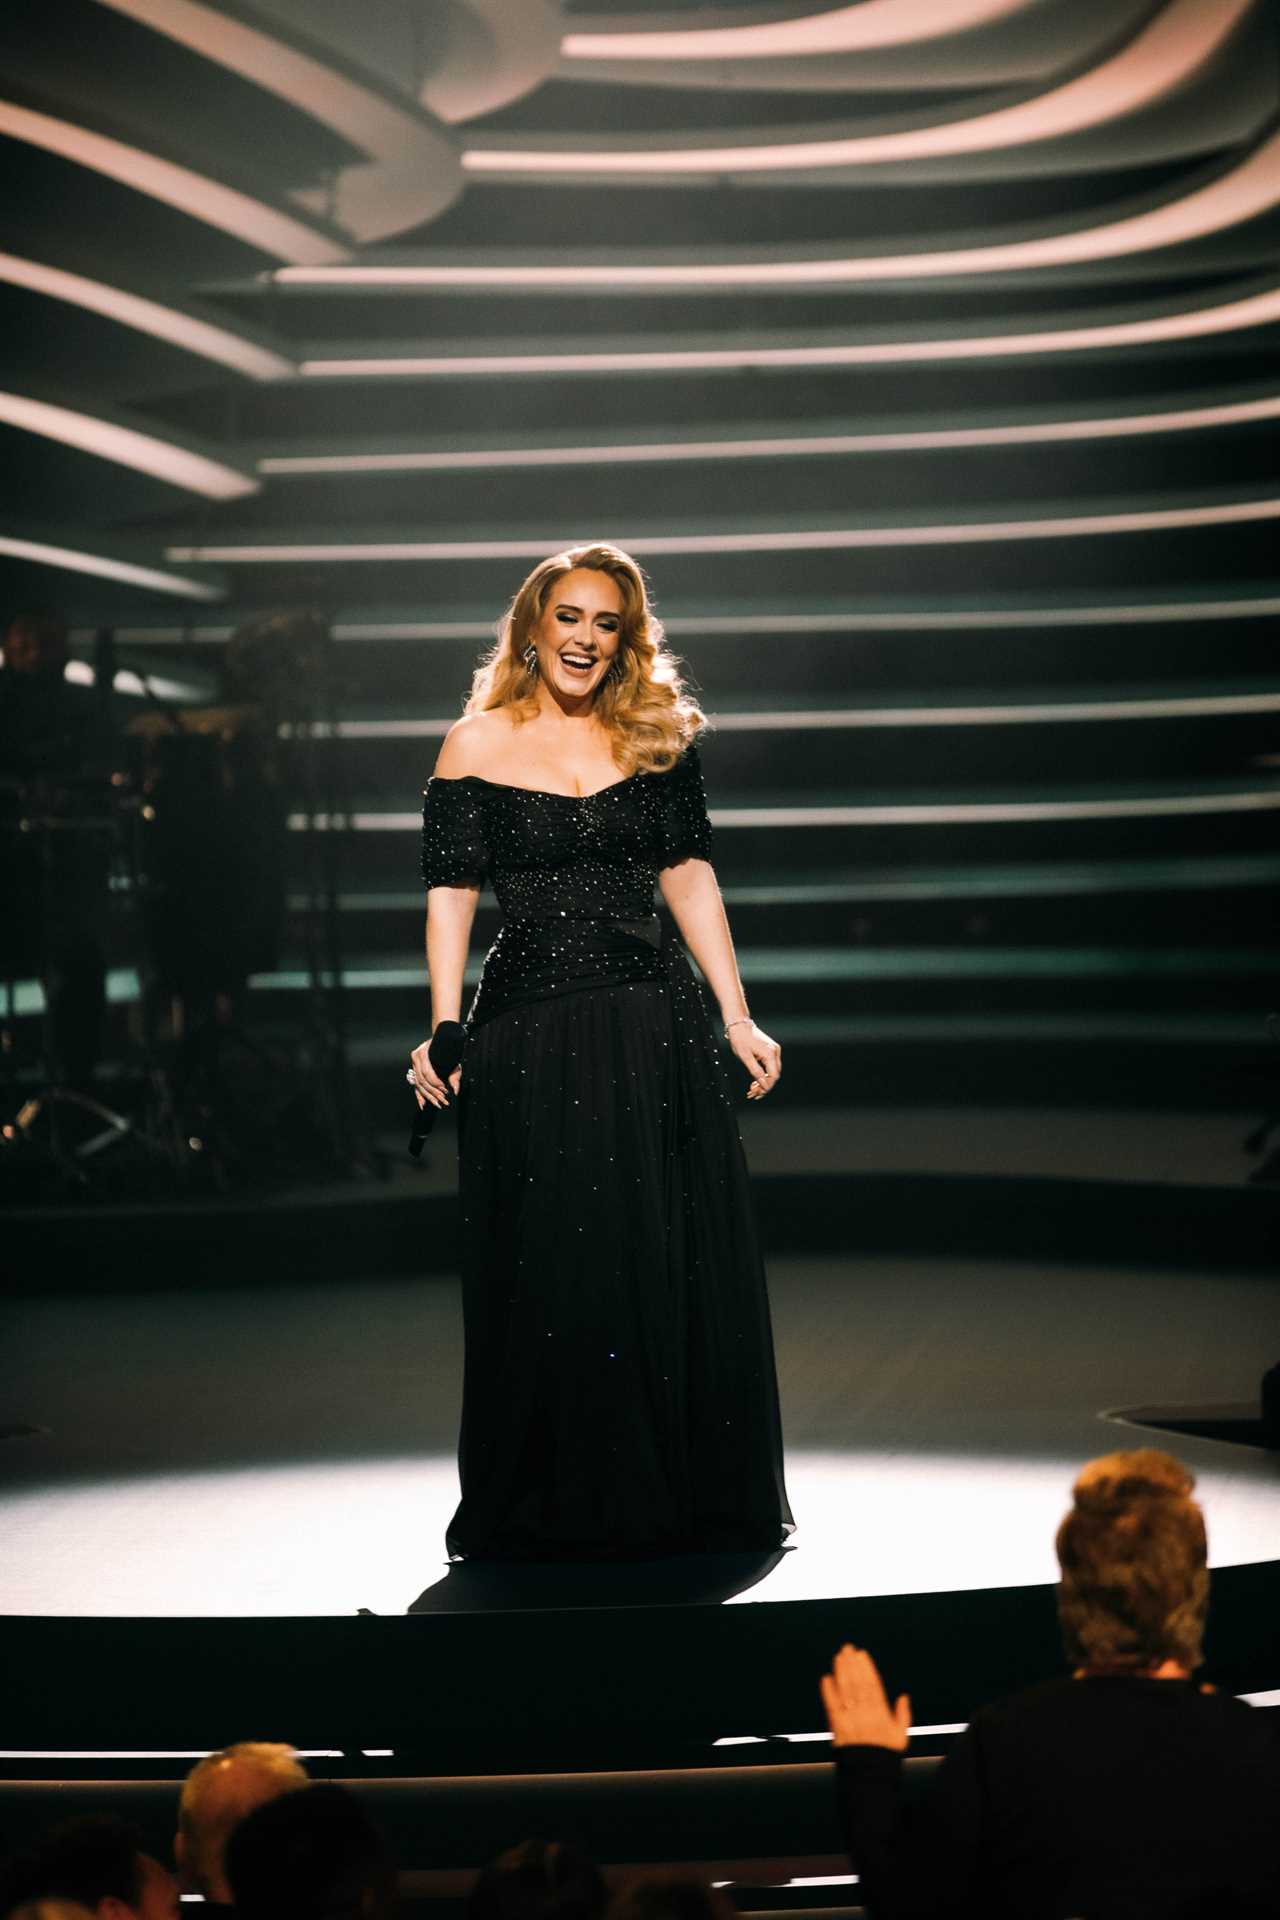 Adele bans unvaccinated fans from attending upcoming concerts